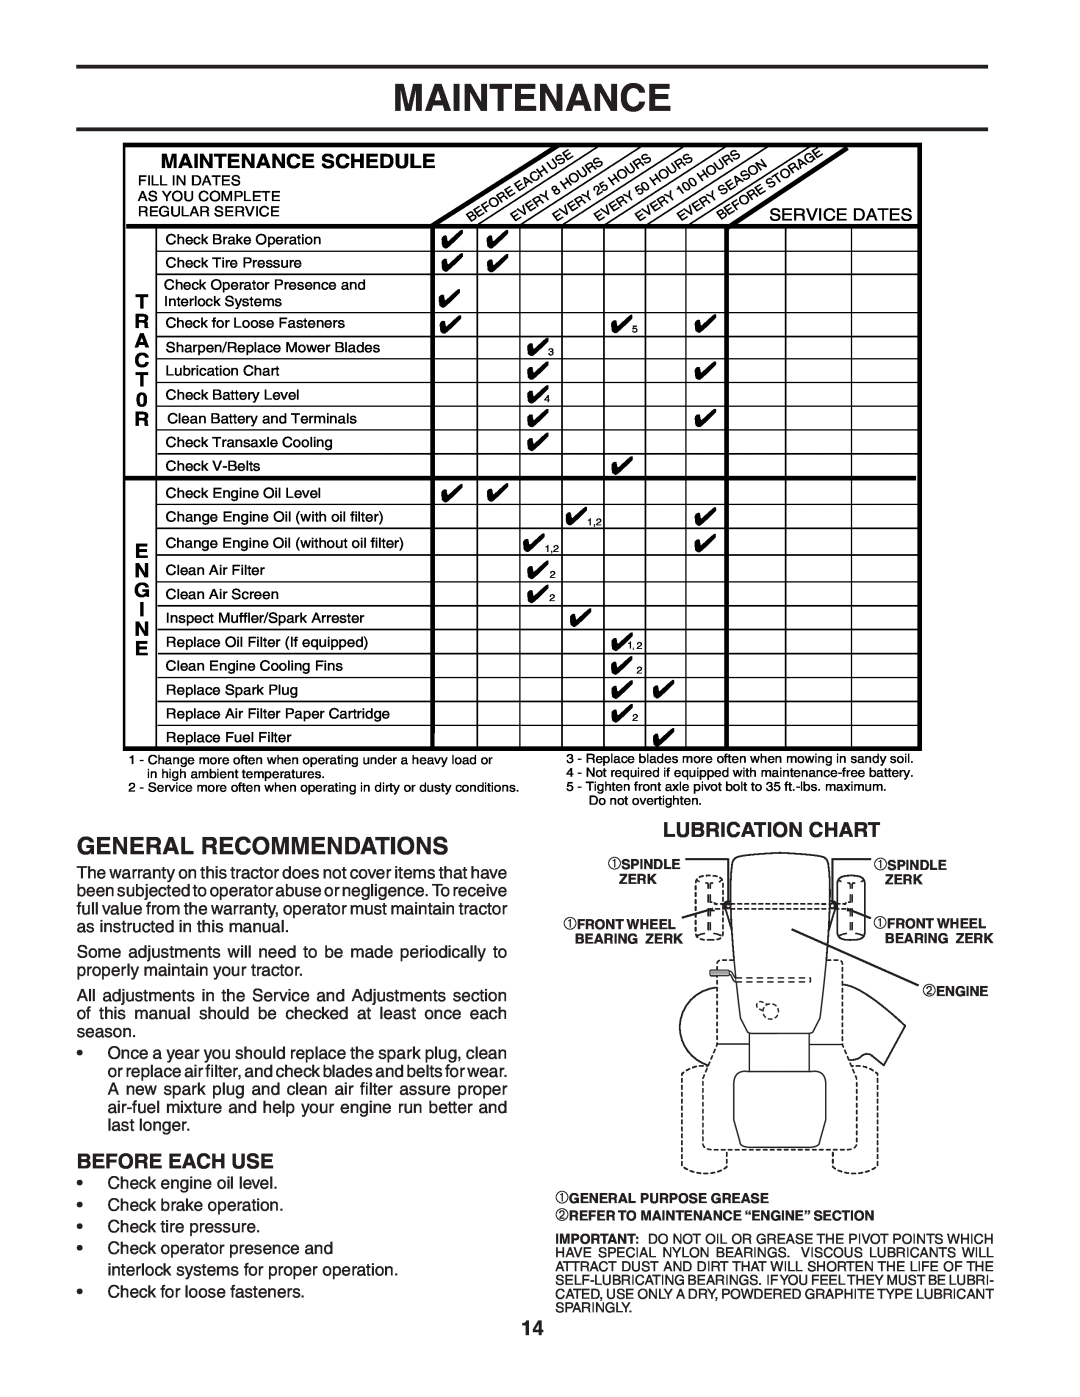 Poulan PO1538C manual General Recommendations, Lubrication Chart, Before Each Use, Maintenance Schedule 